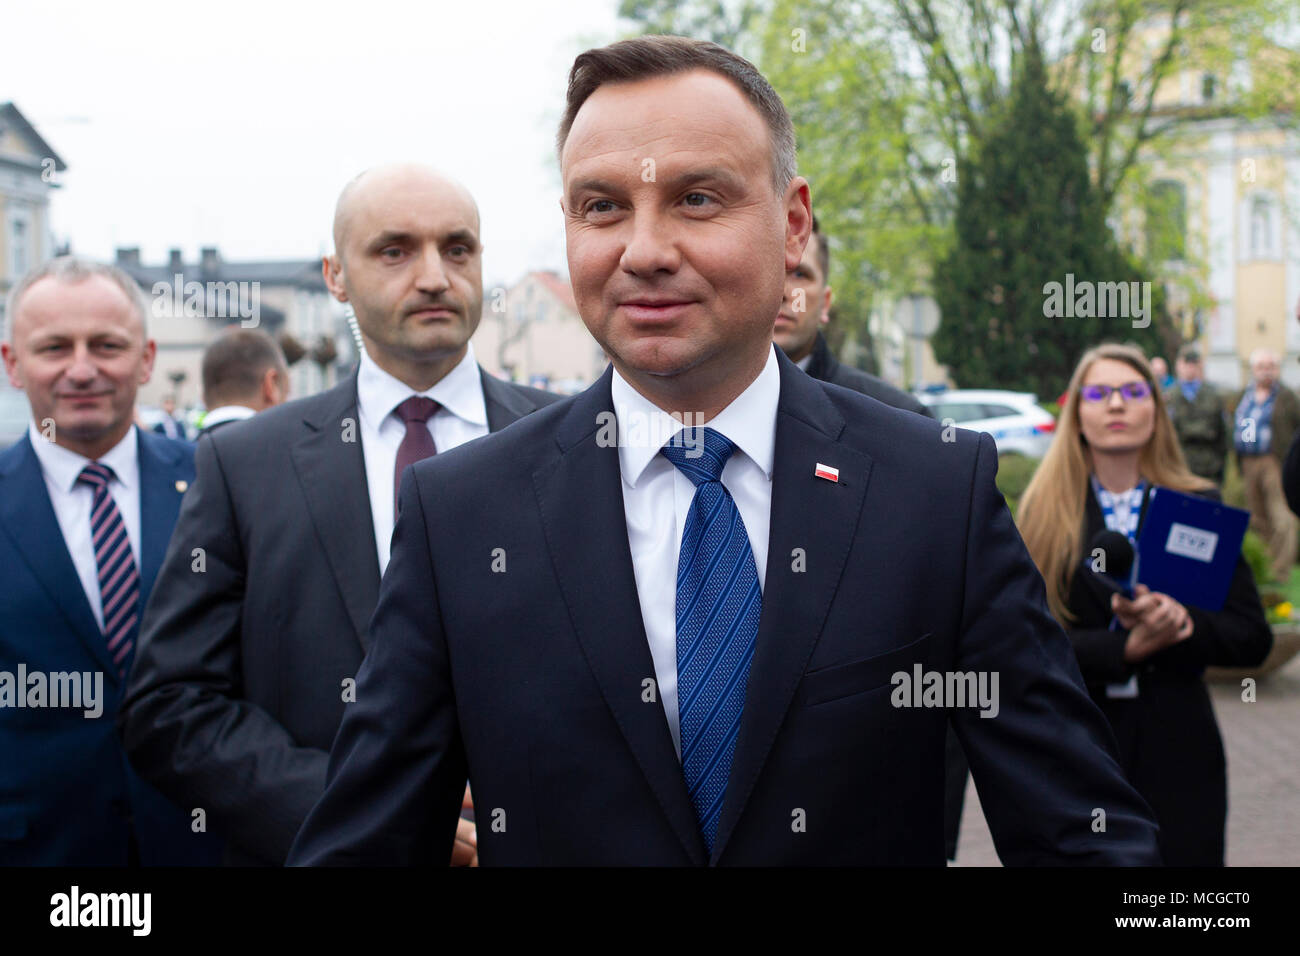 Szamotuly, Poland 16th April 2018. President of the Republic of Poland Andrzej Duda laid a wreath at the Monument to the "Wielkopolska Insurgents on the 60th Anniversary of the Struggle for National Independence". The President of the Republic of Poland also met with residents of Szamotuly. Credit: Slawomir Kowalewski/Alamy Live News Stock Photo